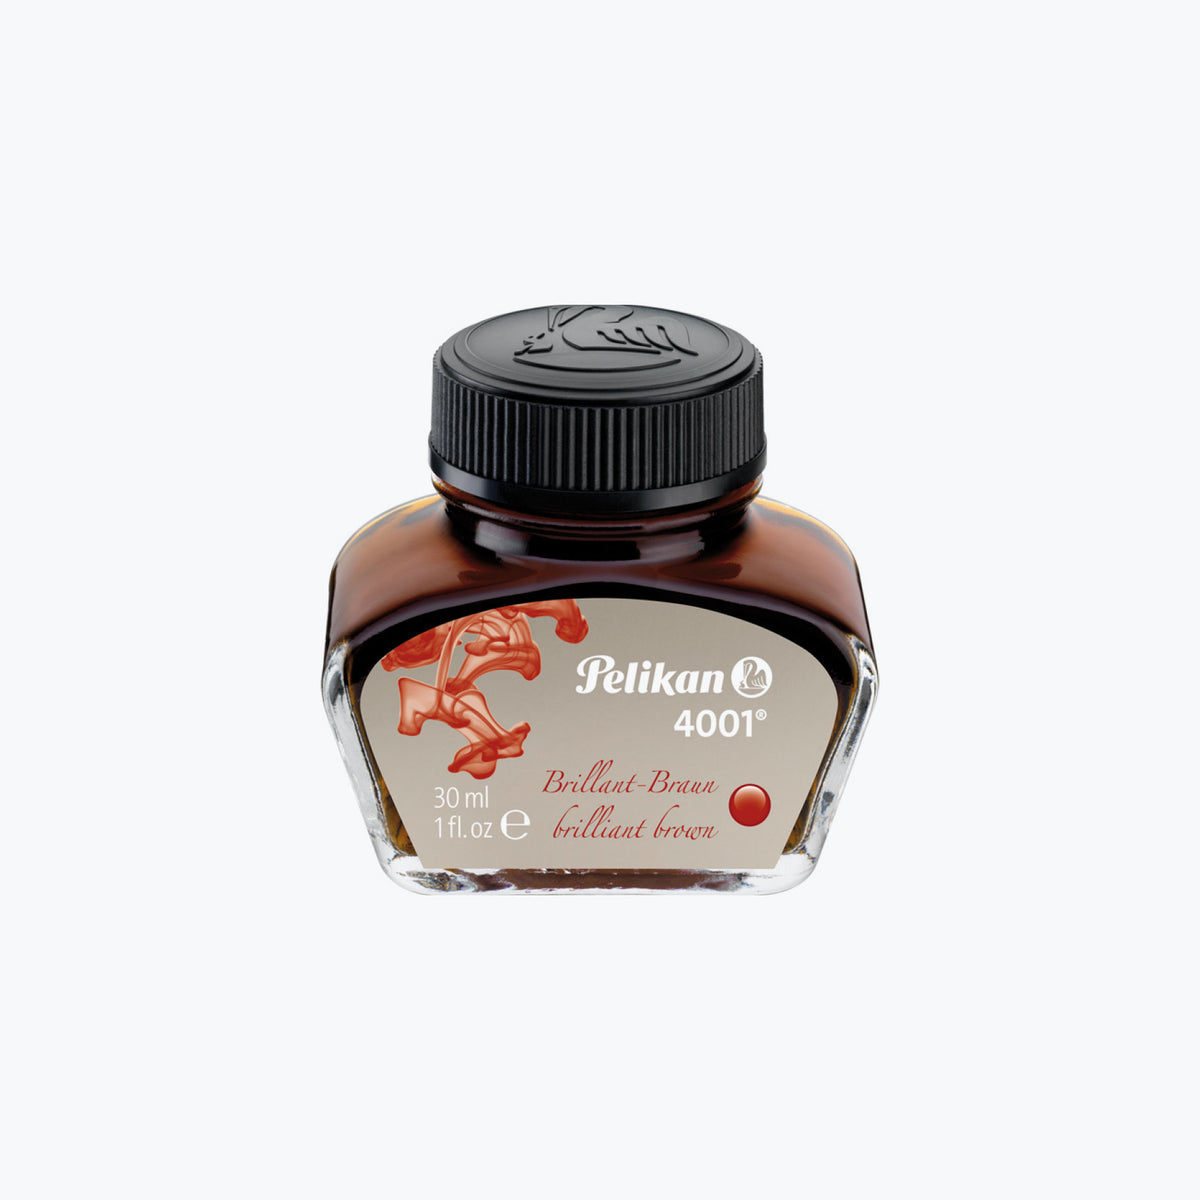 Pelikan - 4001 Ink (30ml) - Brilliant Brown <Outgoing>